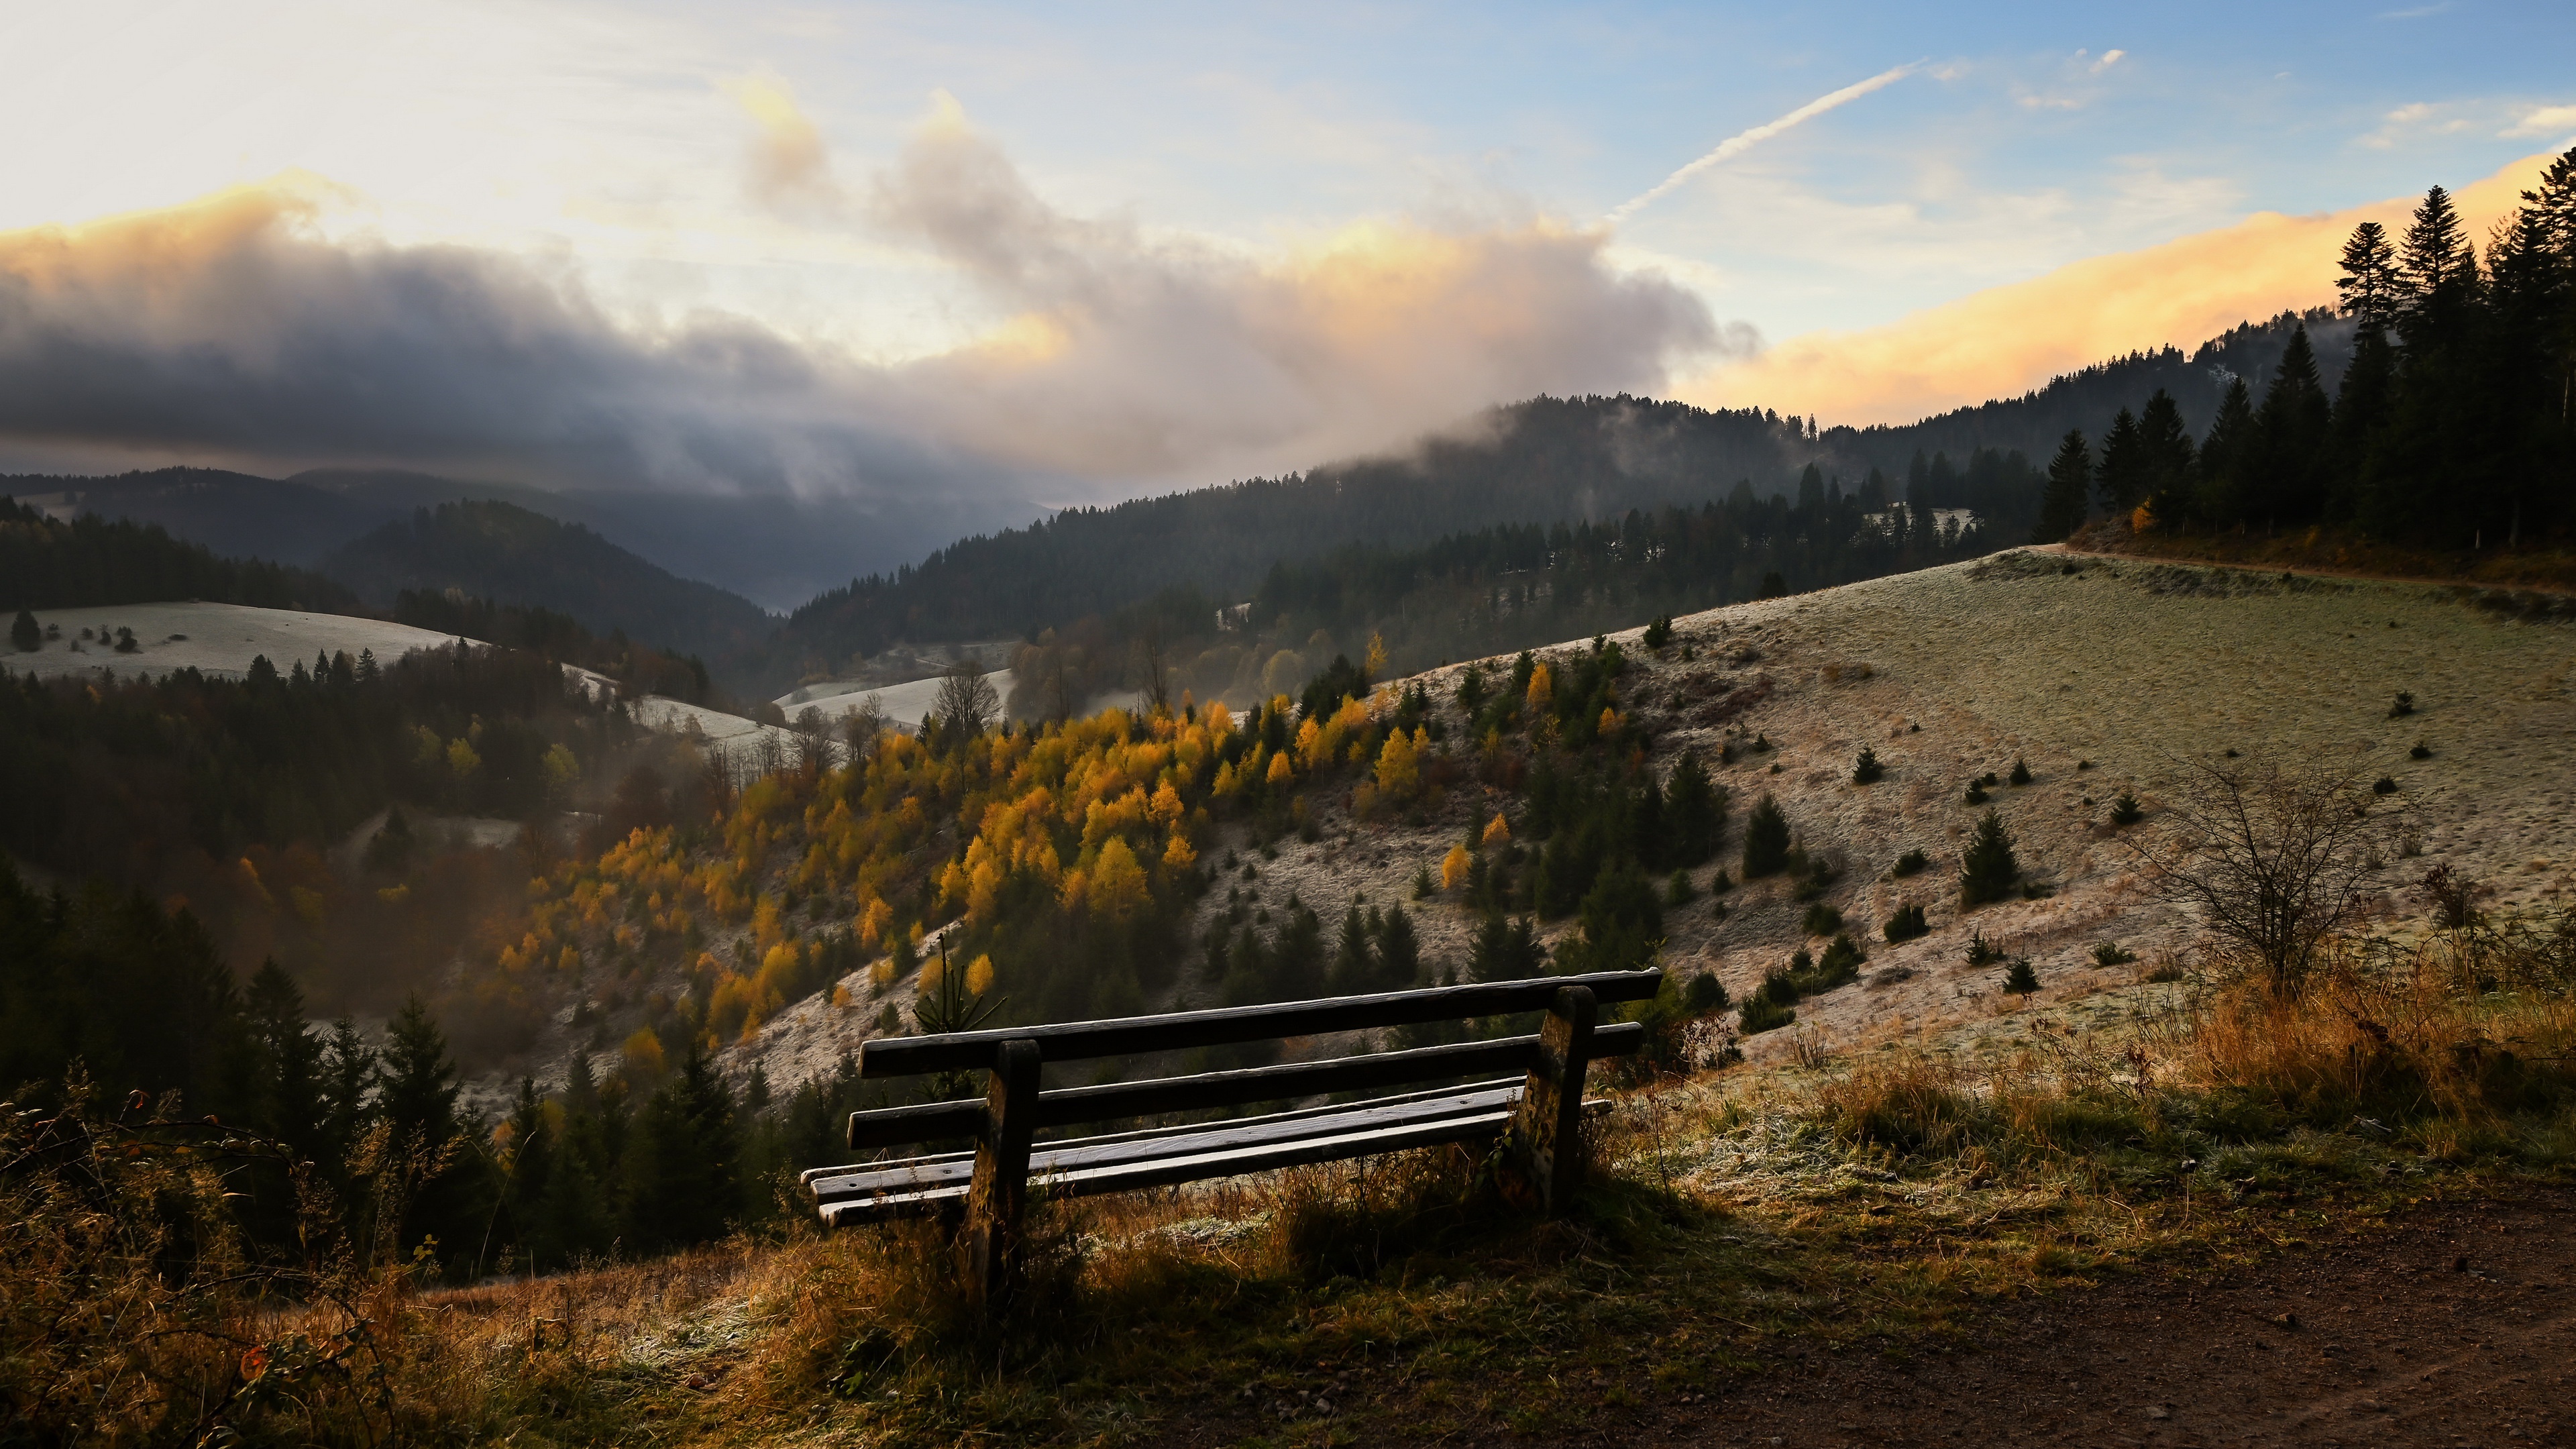 General 3840x2160 outdoors nature fall landscape bench